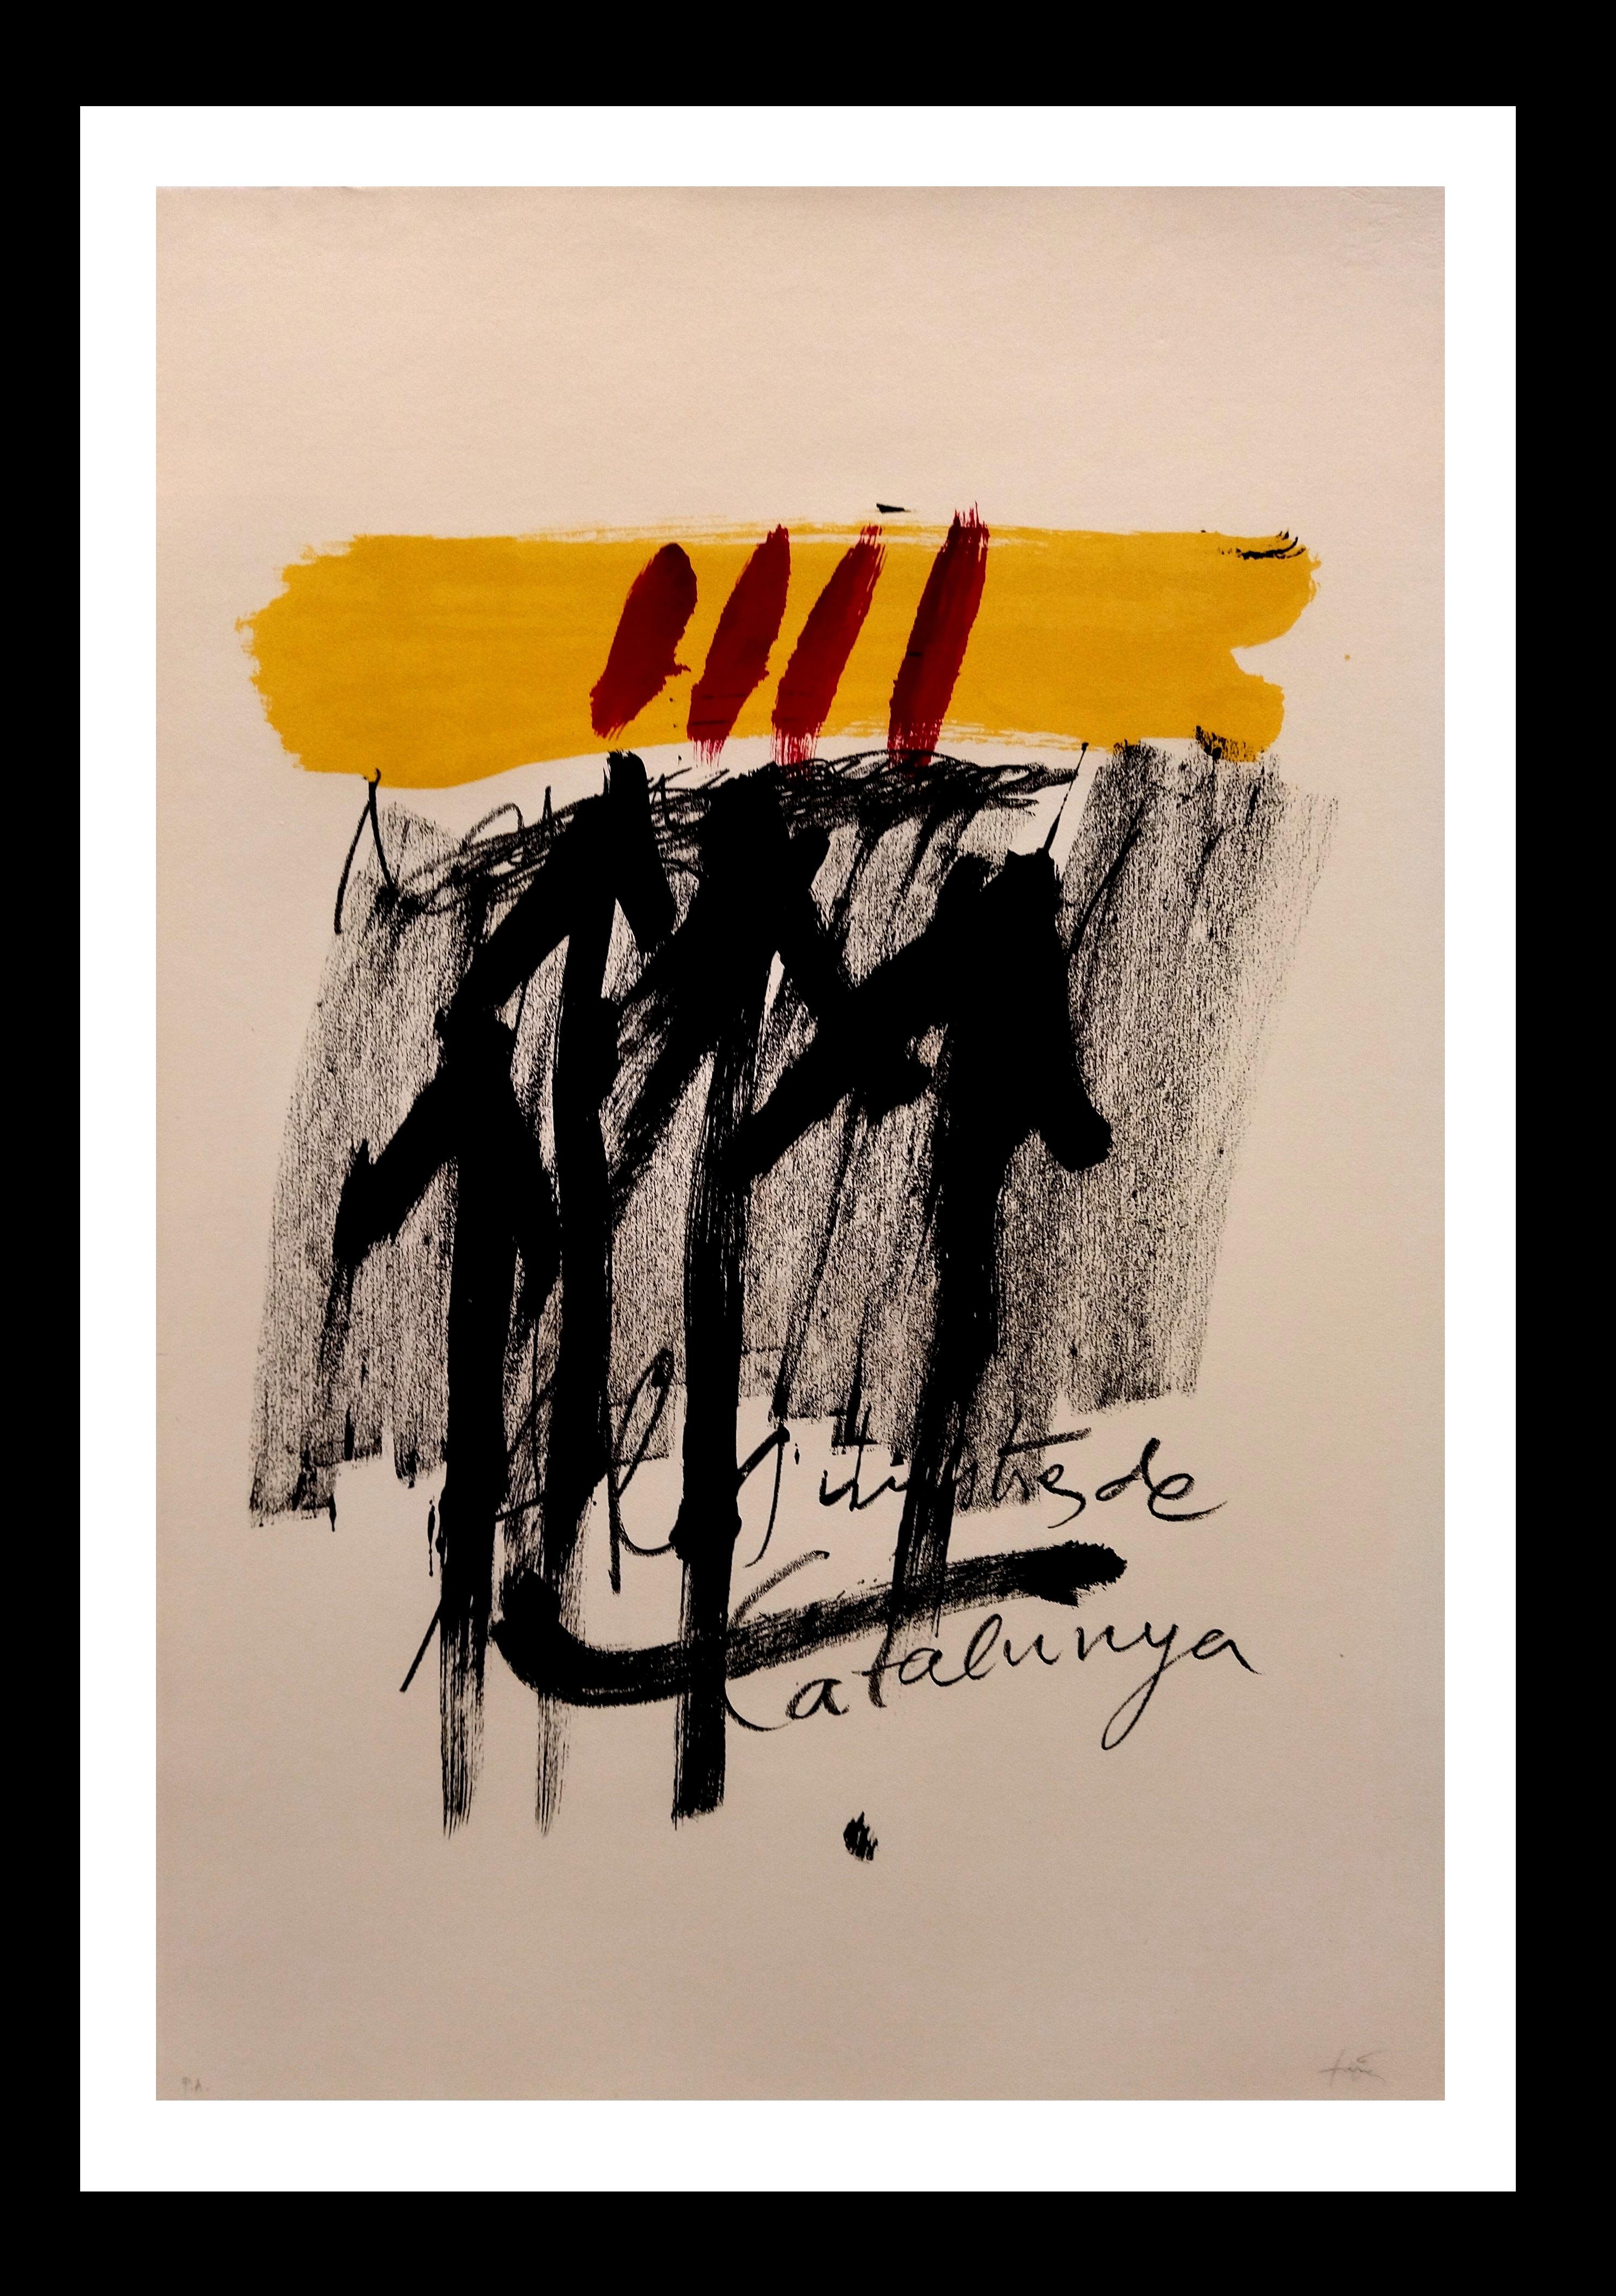  Tapies  Black  Red  Yellow  Vertical  original lithograph painting